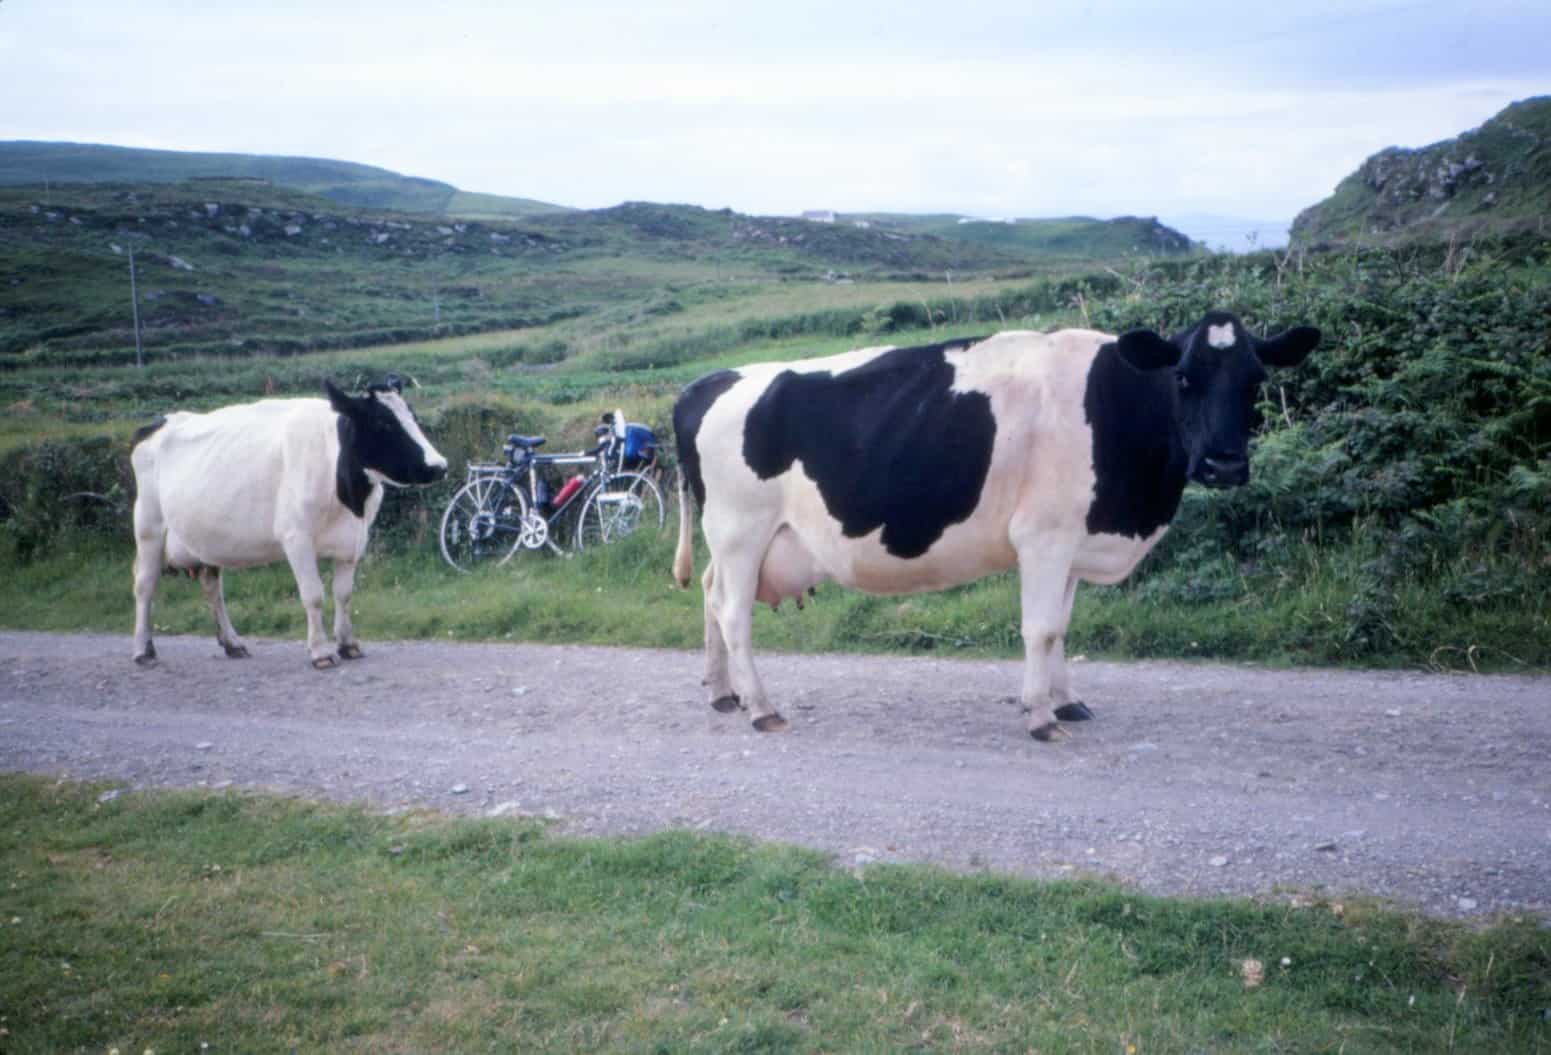 Bikes and cows, Ireland